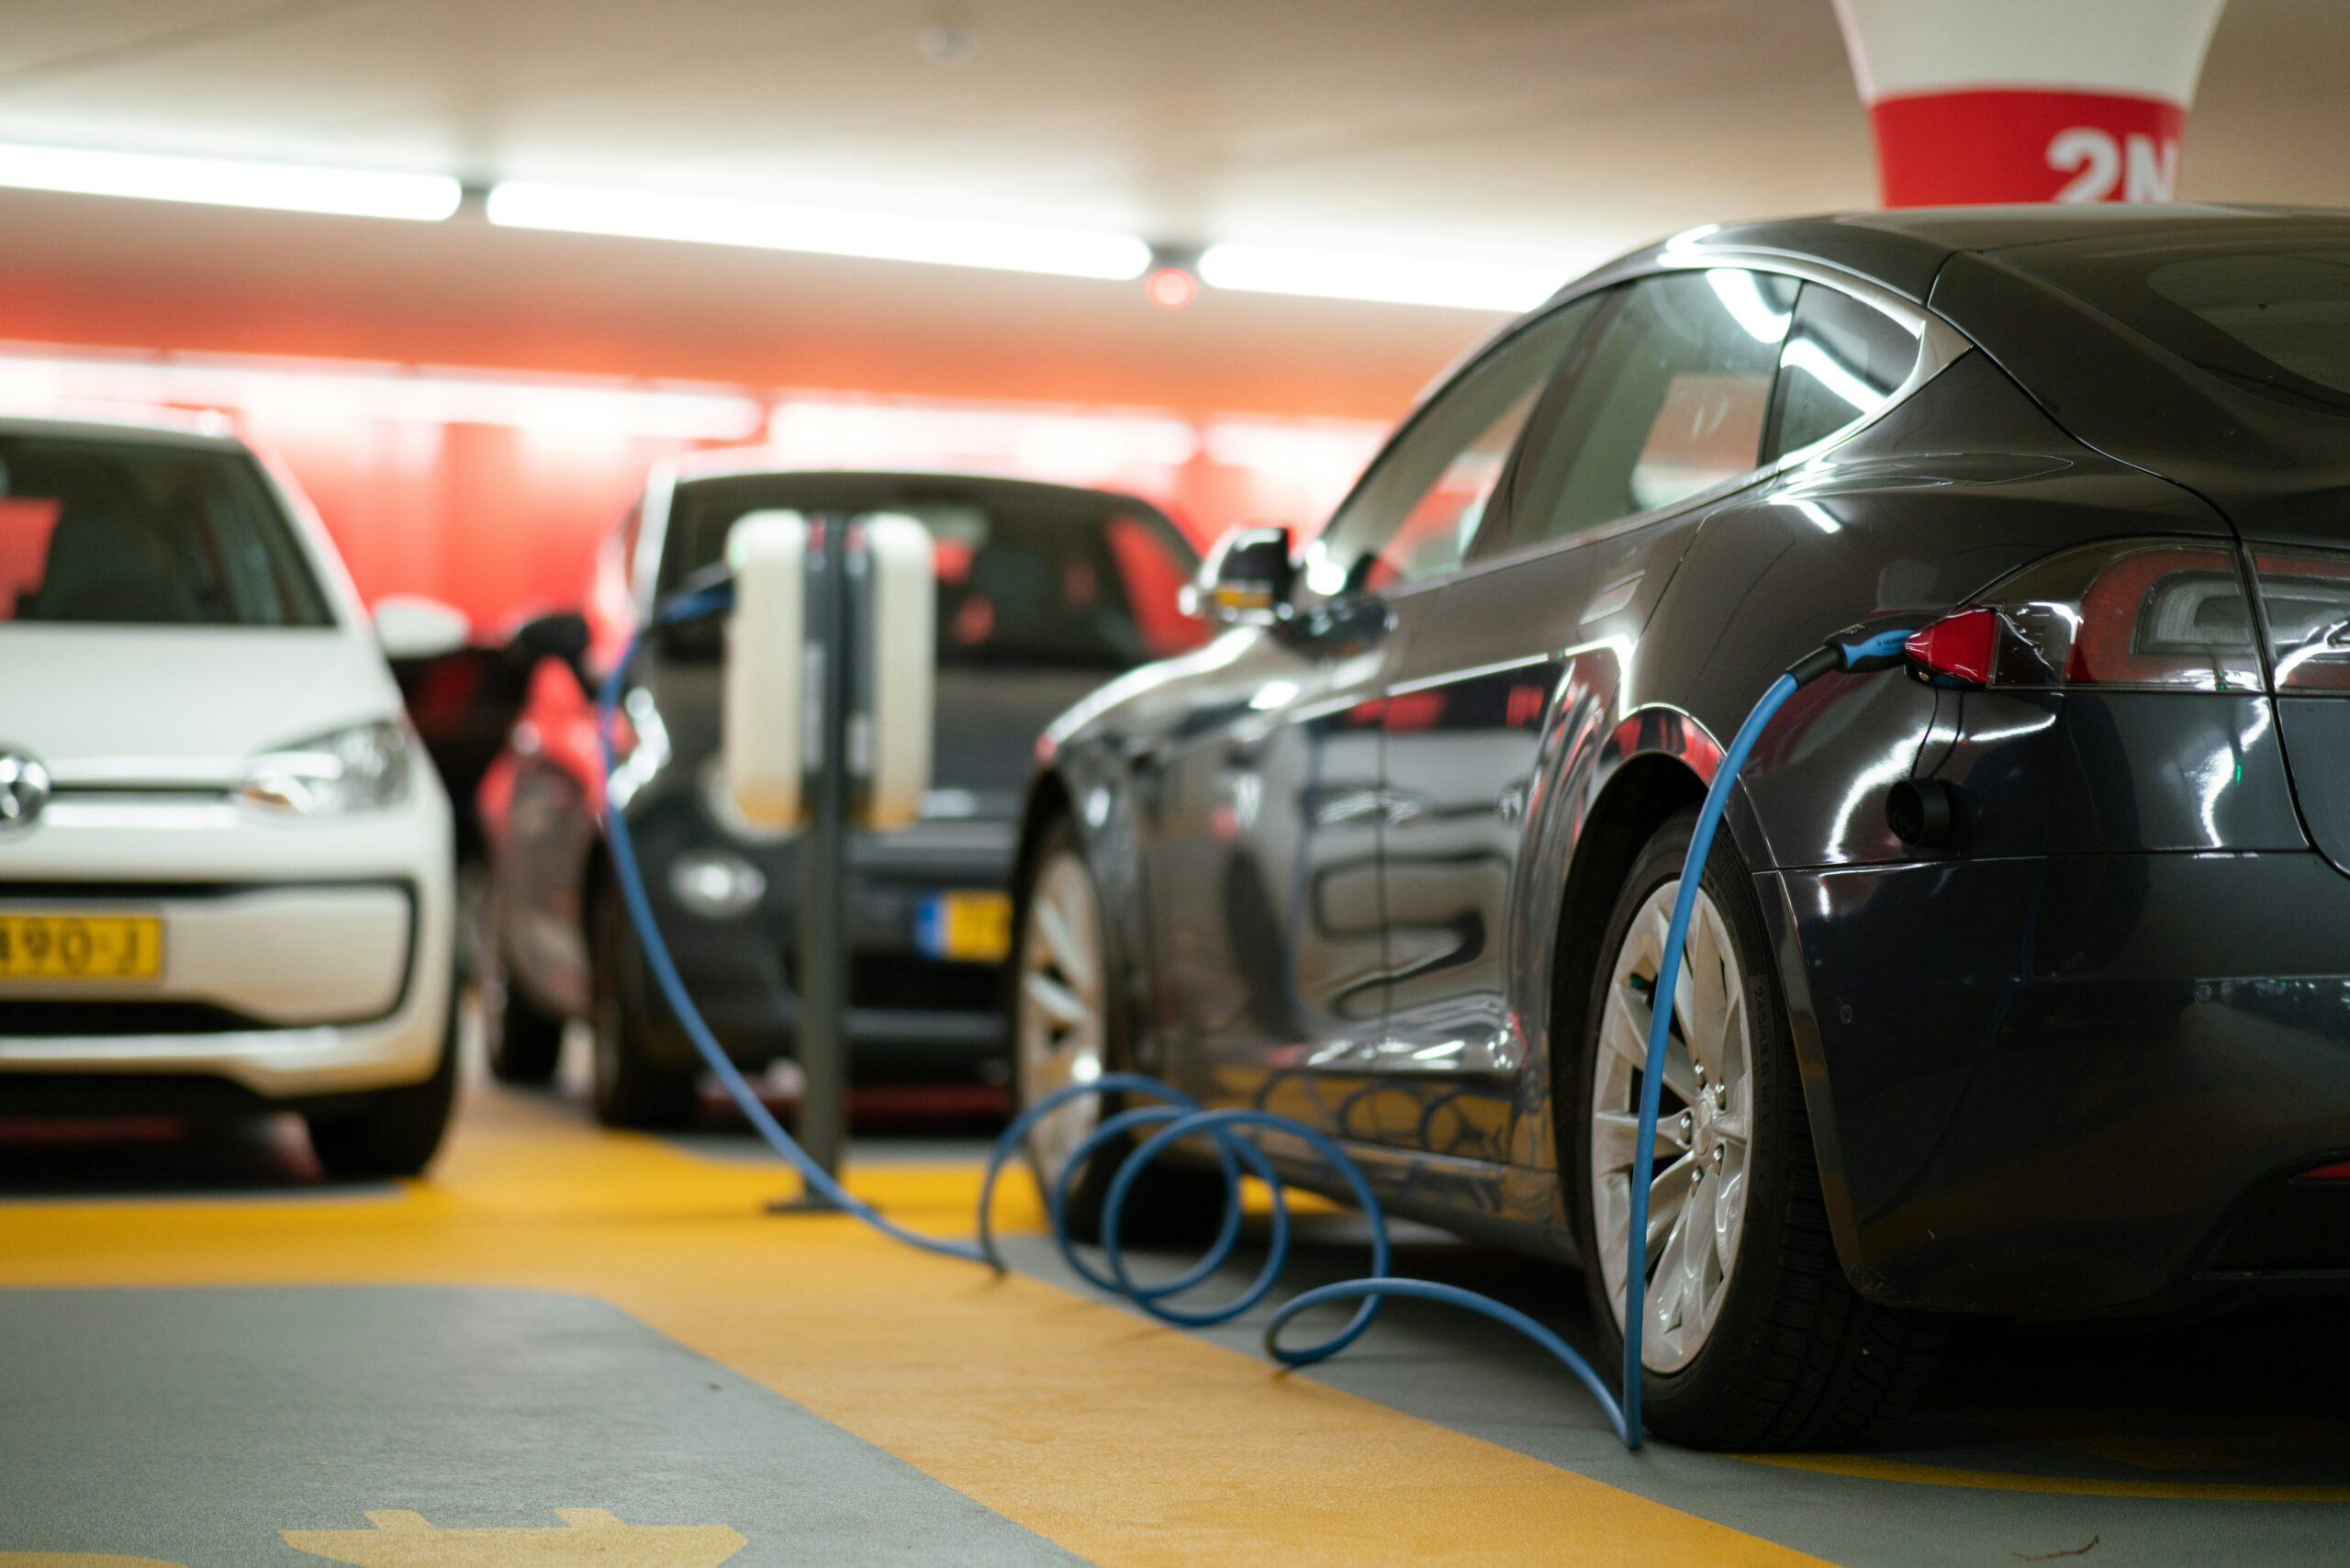 Ontario Energizes EV Adoption: The Impact of the New EVCCP on Streamlining Charger Deployment